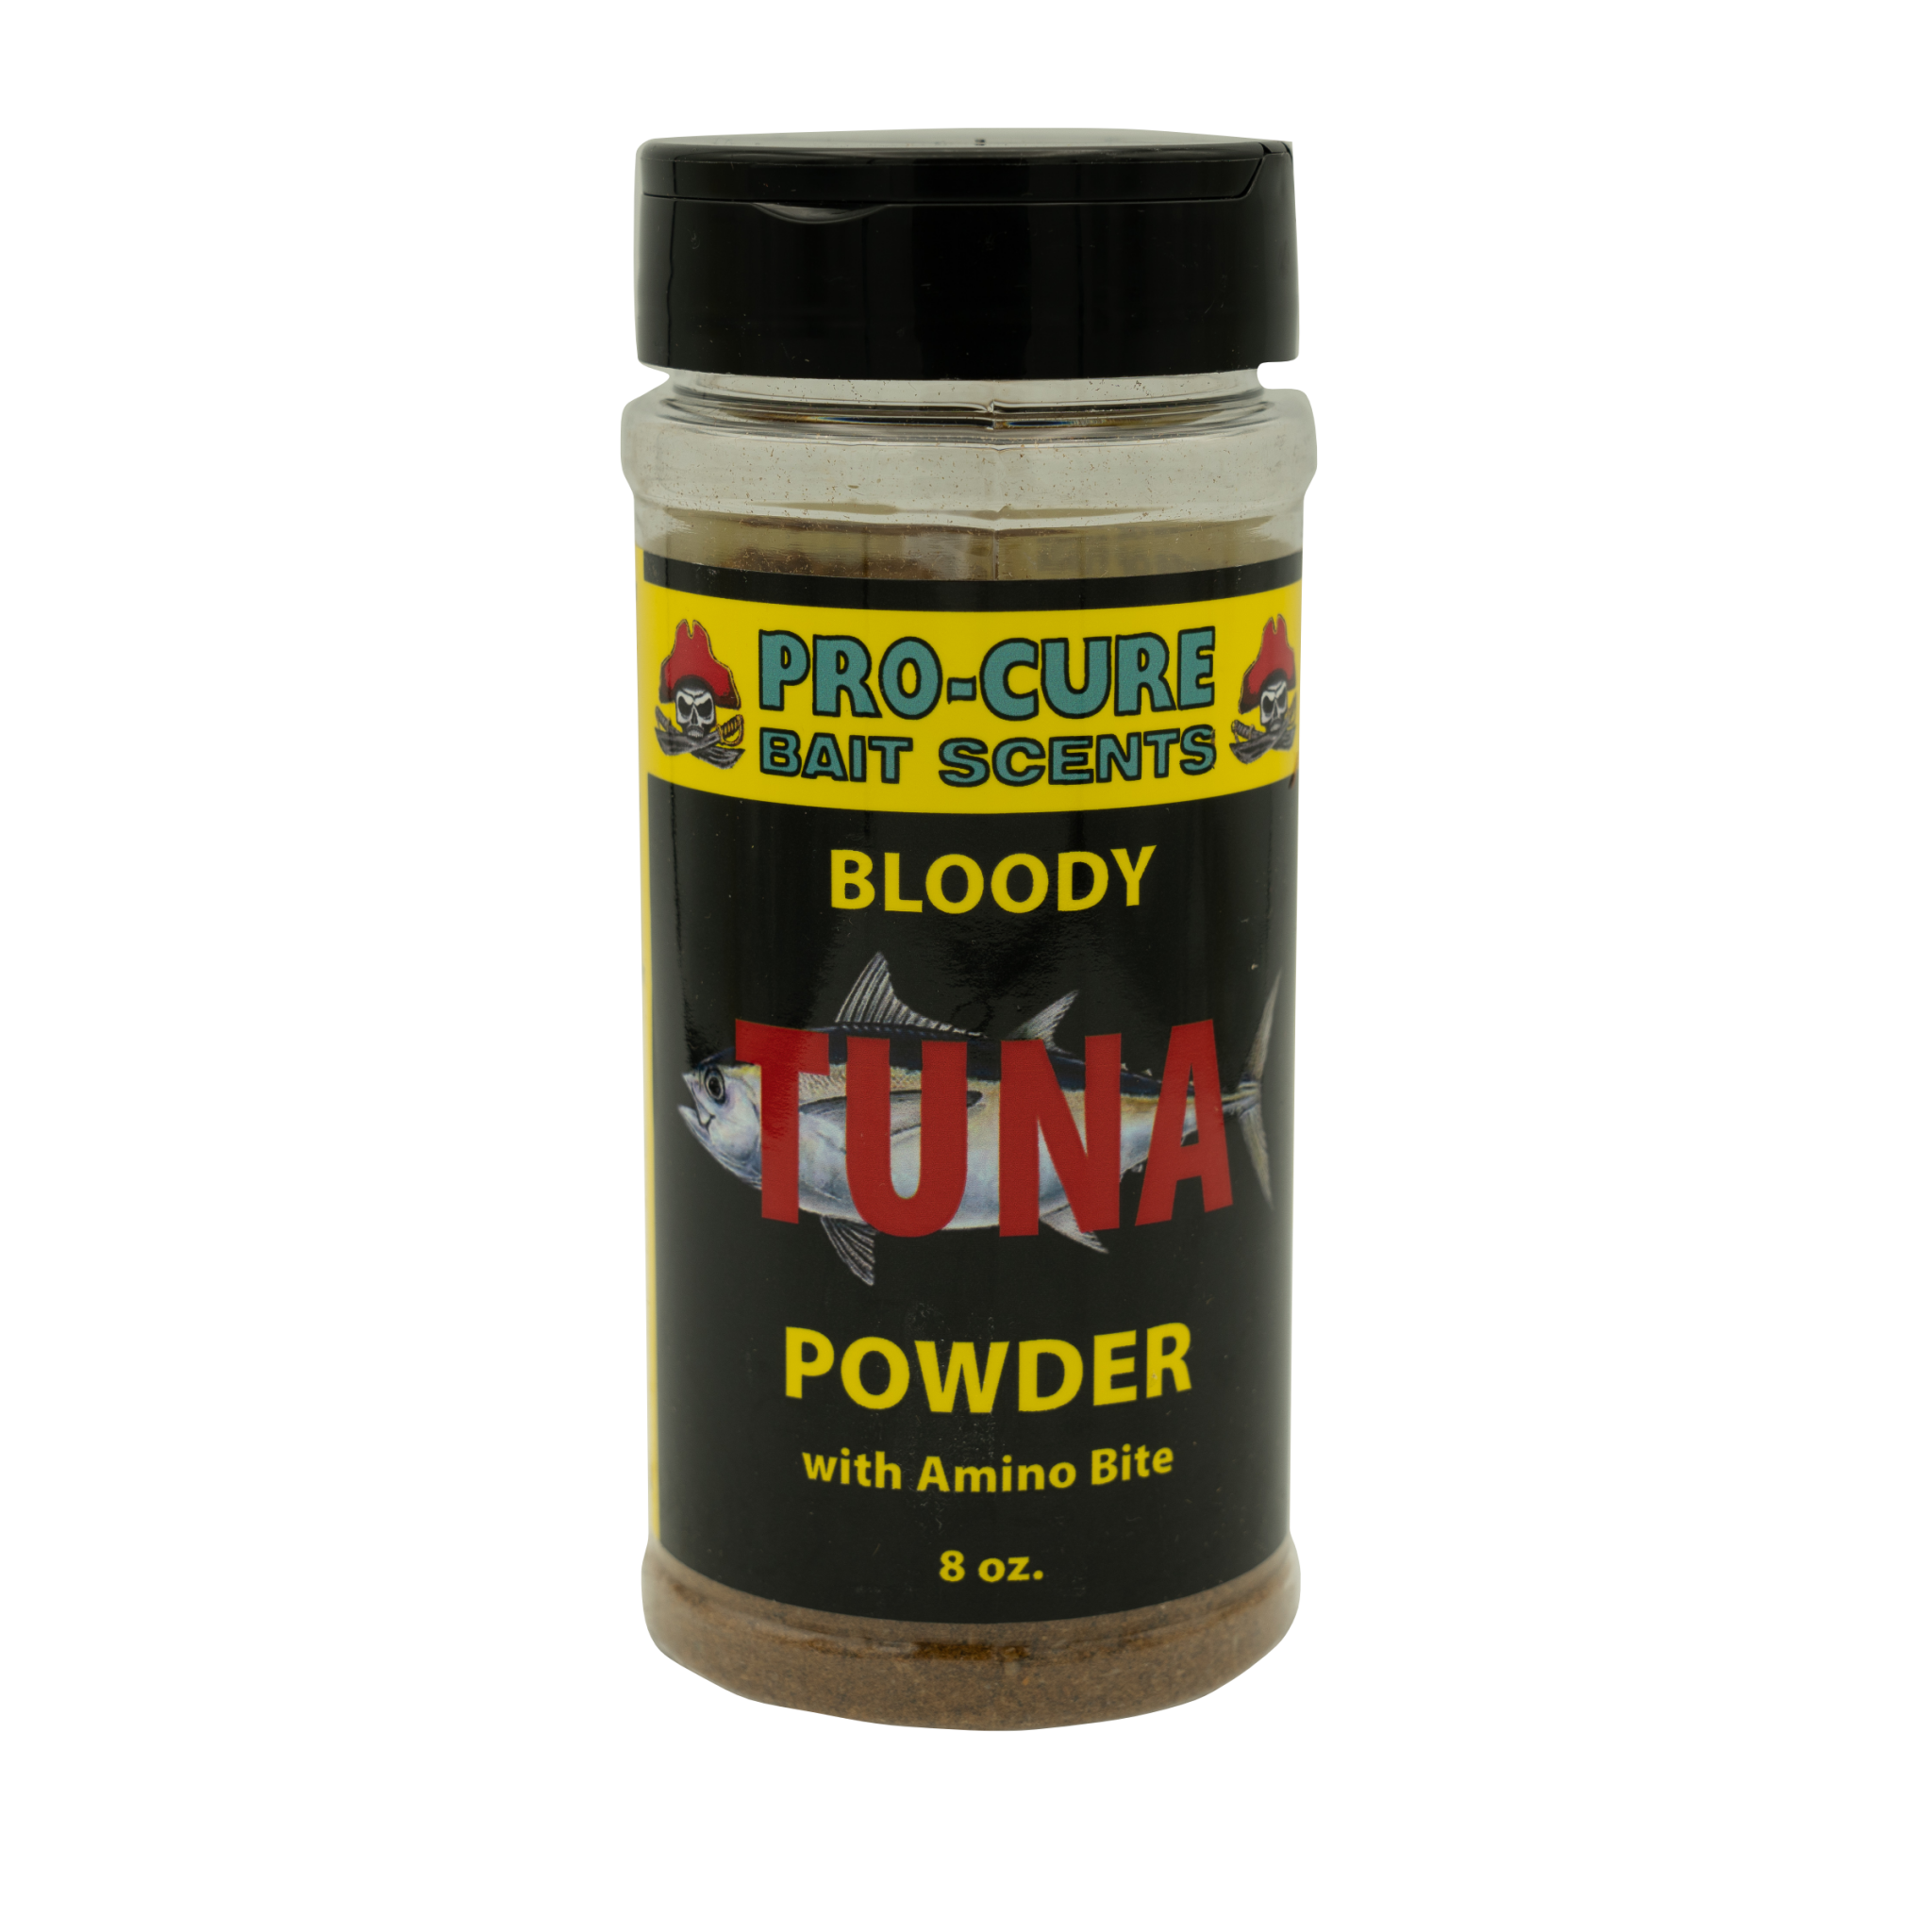 ANISE BLOODY TUNA OIL – Pro-Cure, Inc